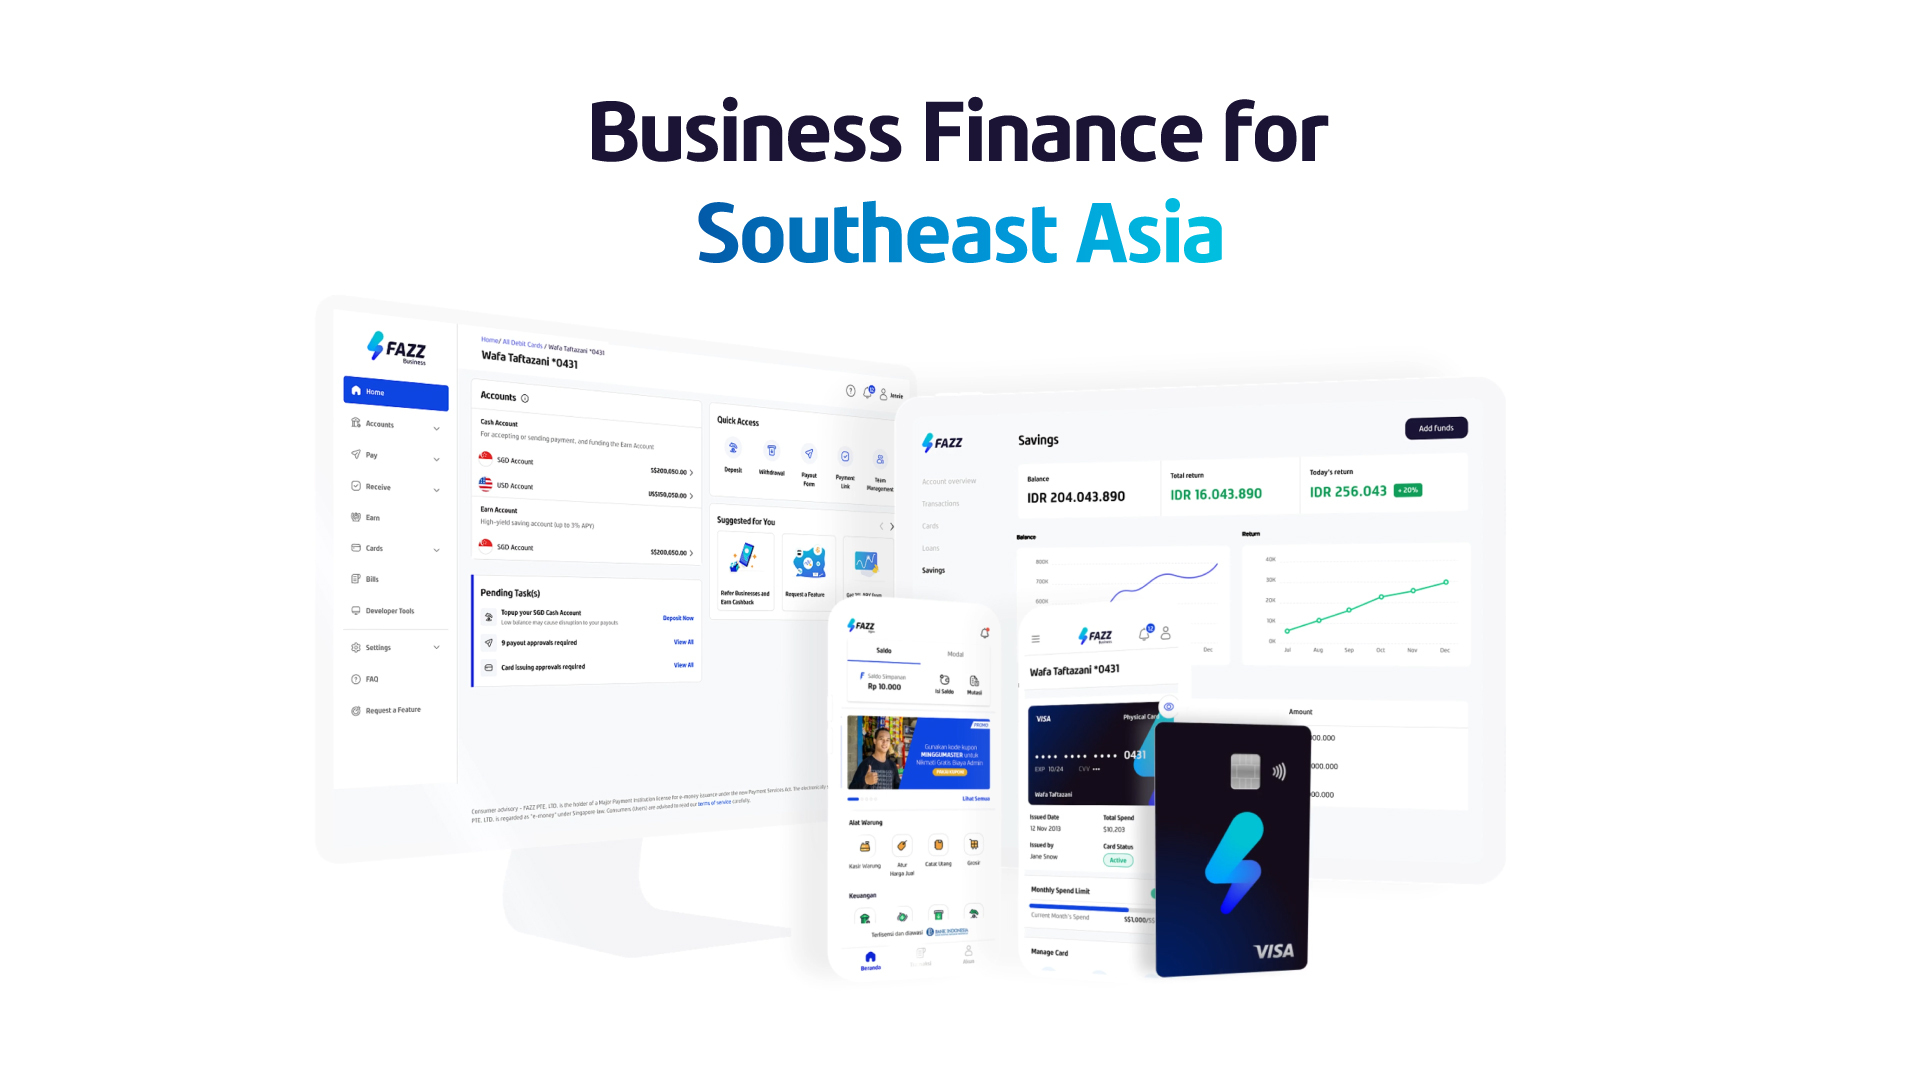 Business-finance-for-southeast-asia-1920x1080-1